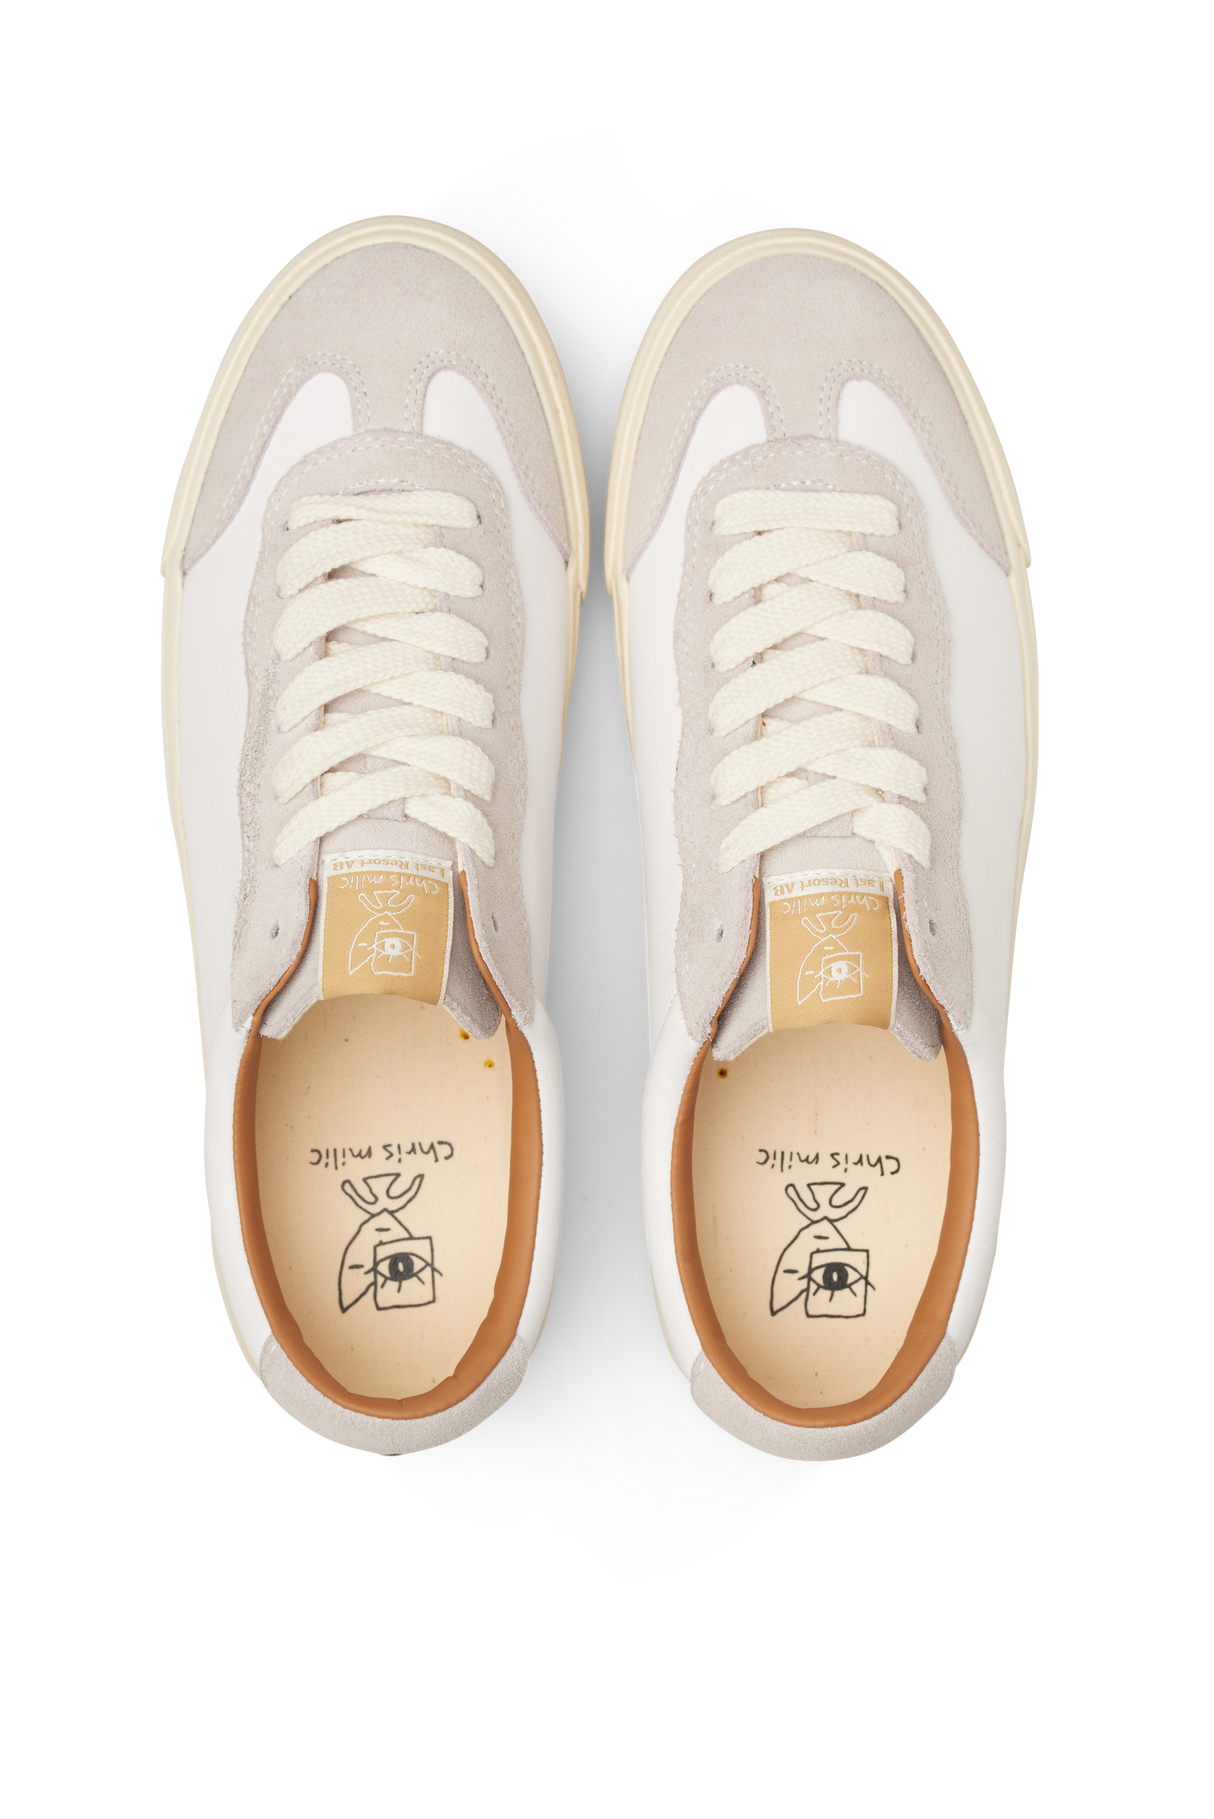 Last Resort VM004 Milic Duo White White Suede Shoes